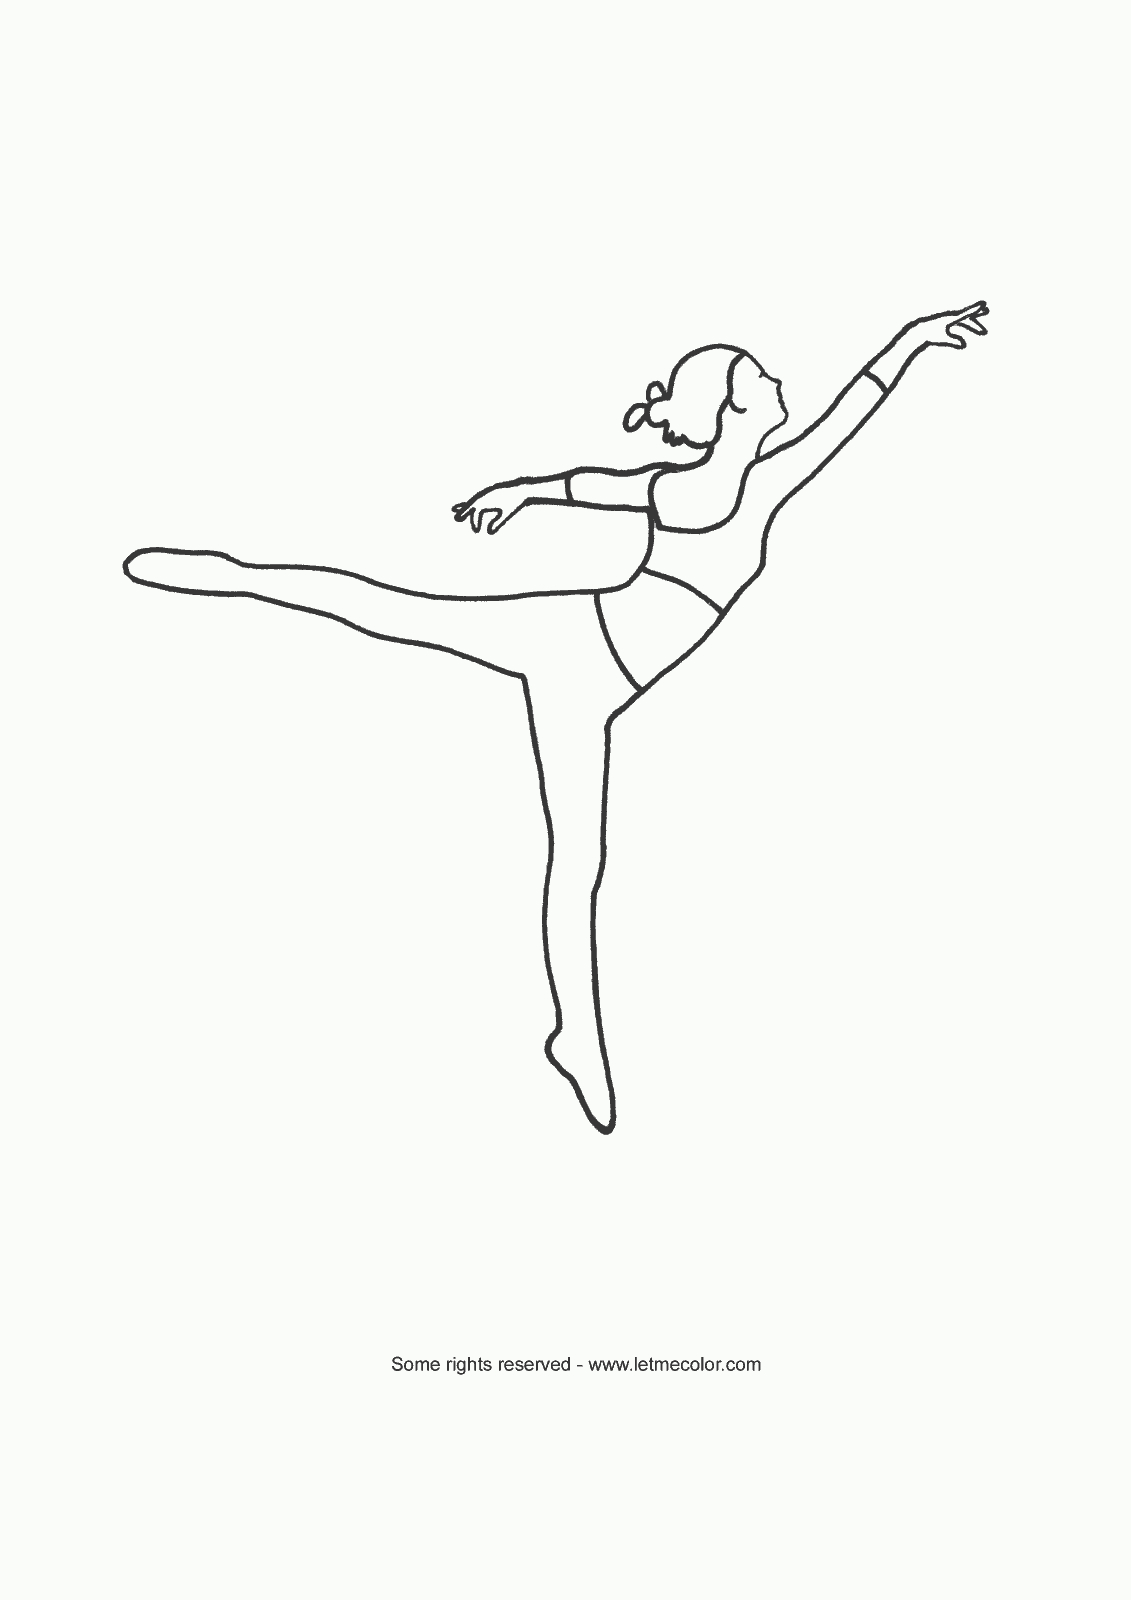 Dancing Coloring Page Ballet Dancing Girl Coloring Page Letmecolor